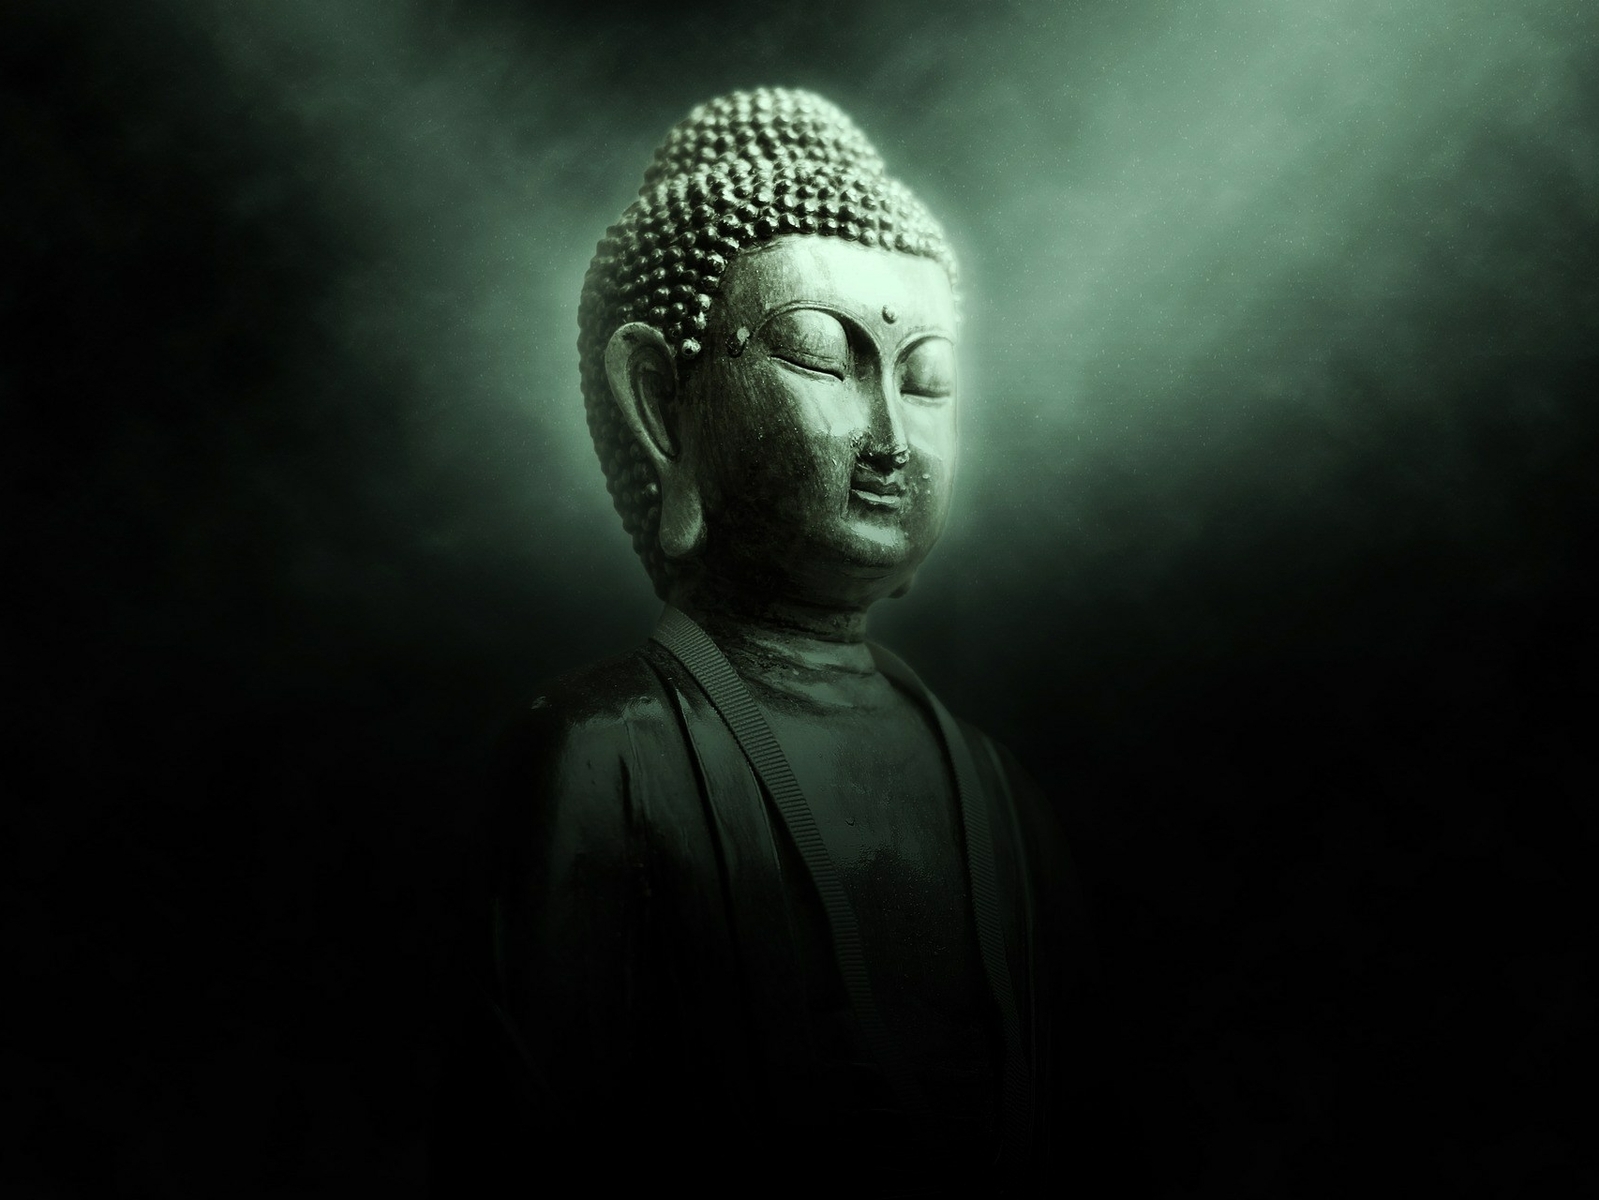 Inner peace (Buddha) by strats 360 on Dribbble